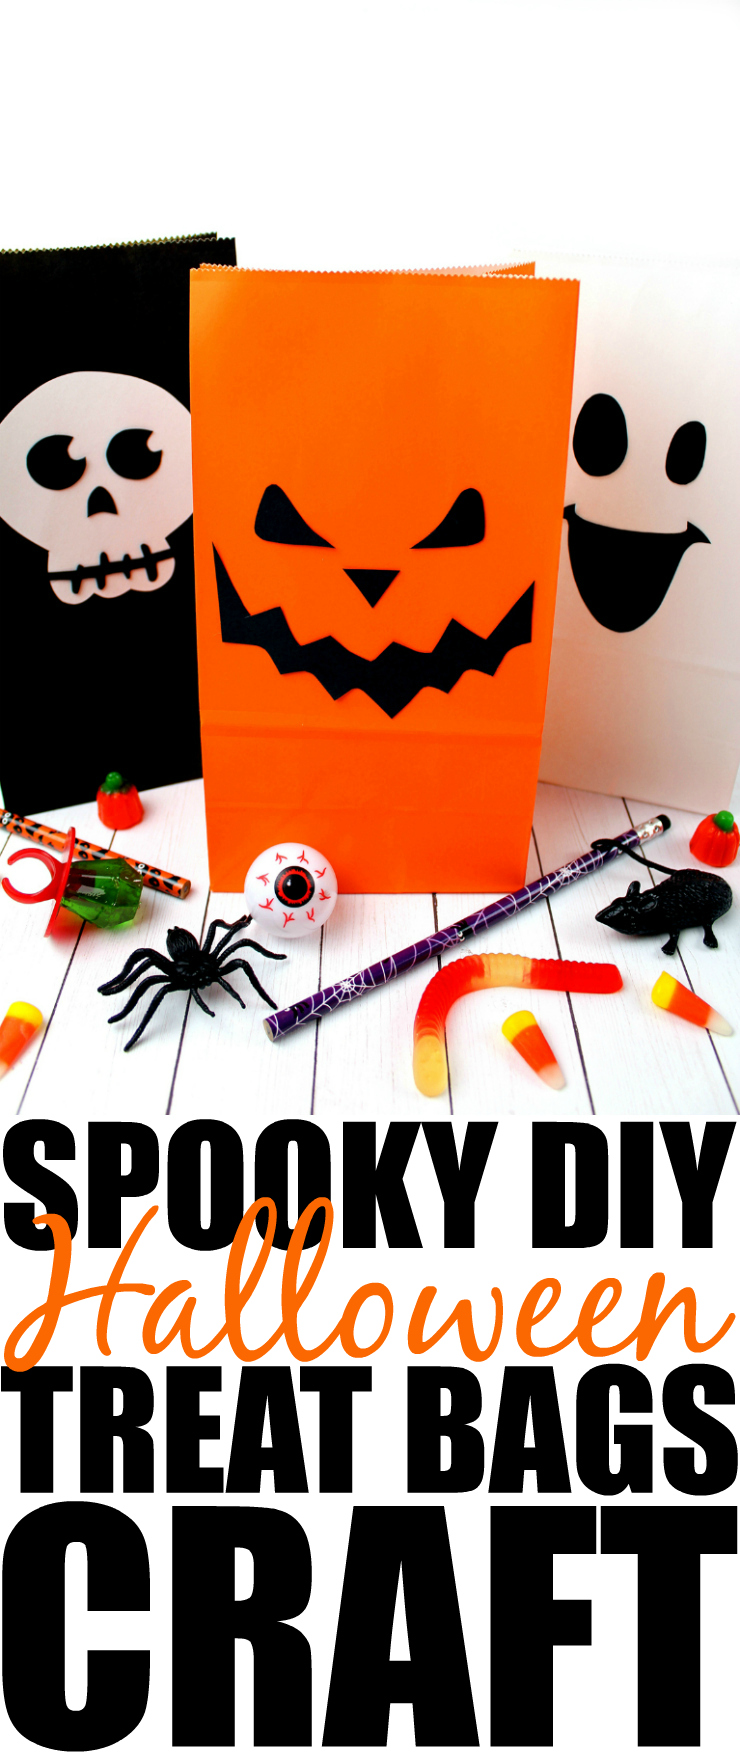 spooky-diy-halloween-treat-bags-craft-extreme-couponing-mom